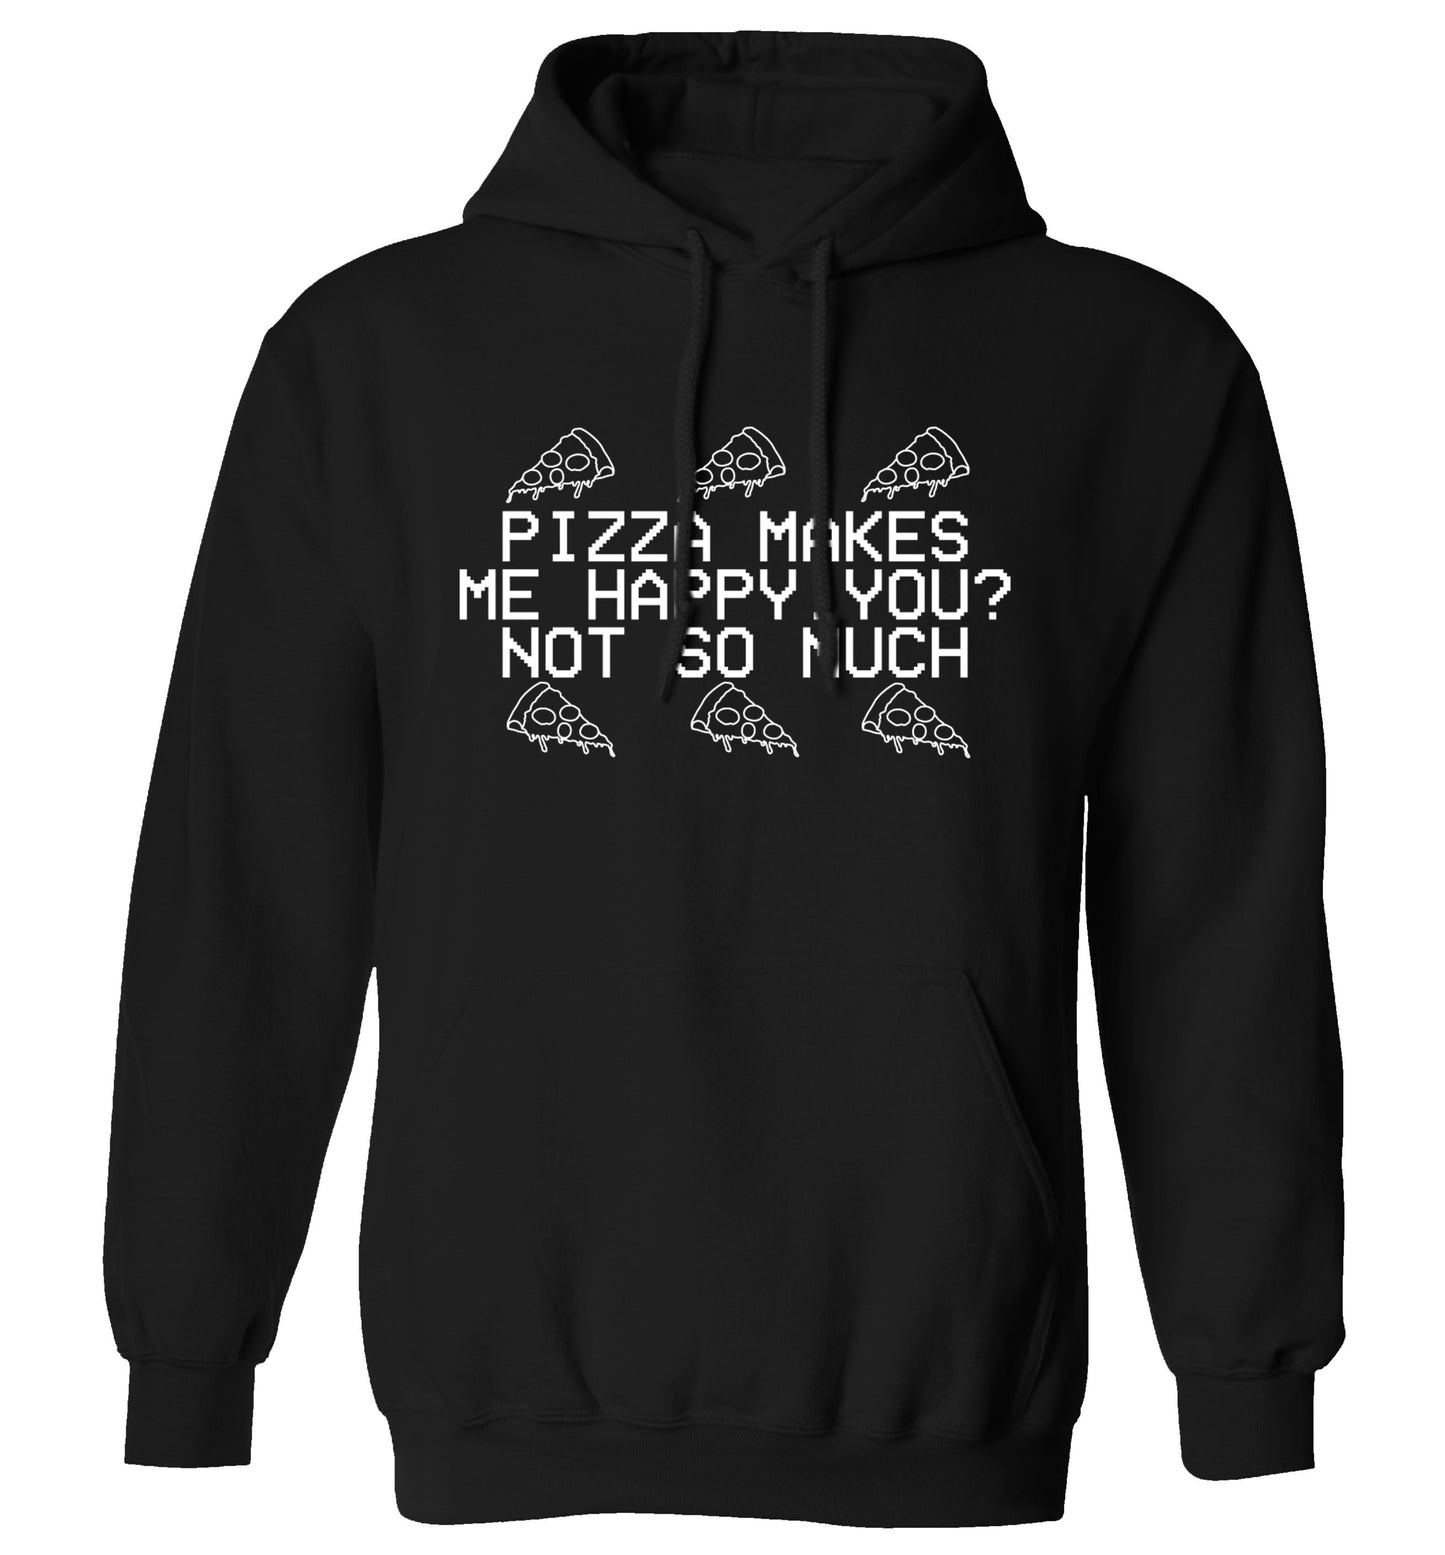 Pizza makes me happy, You? Not so much adults unisex black hoodie 2XL